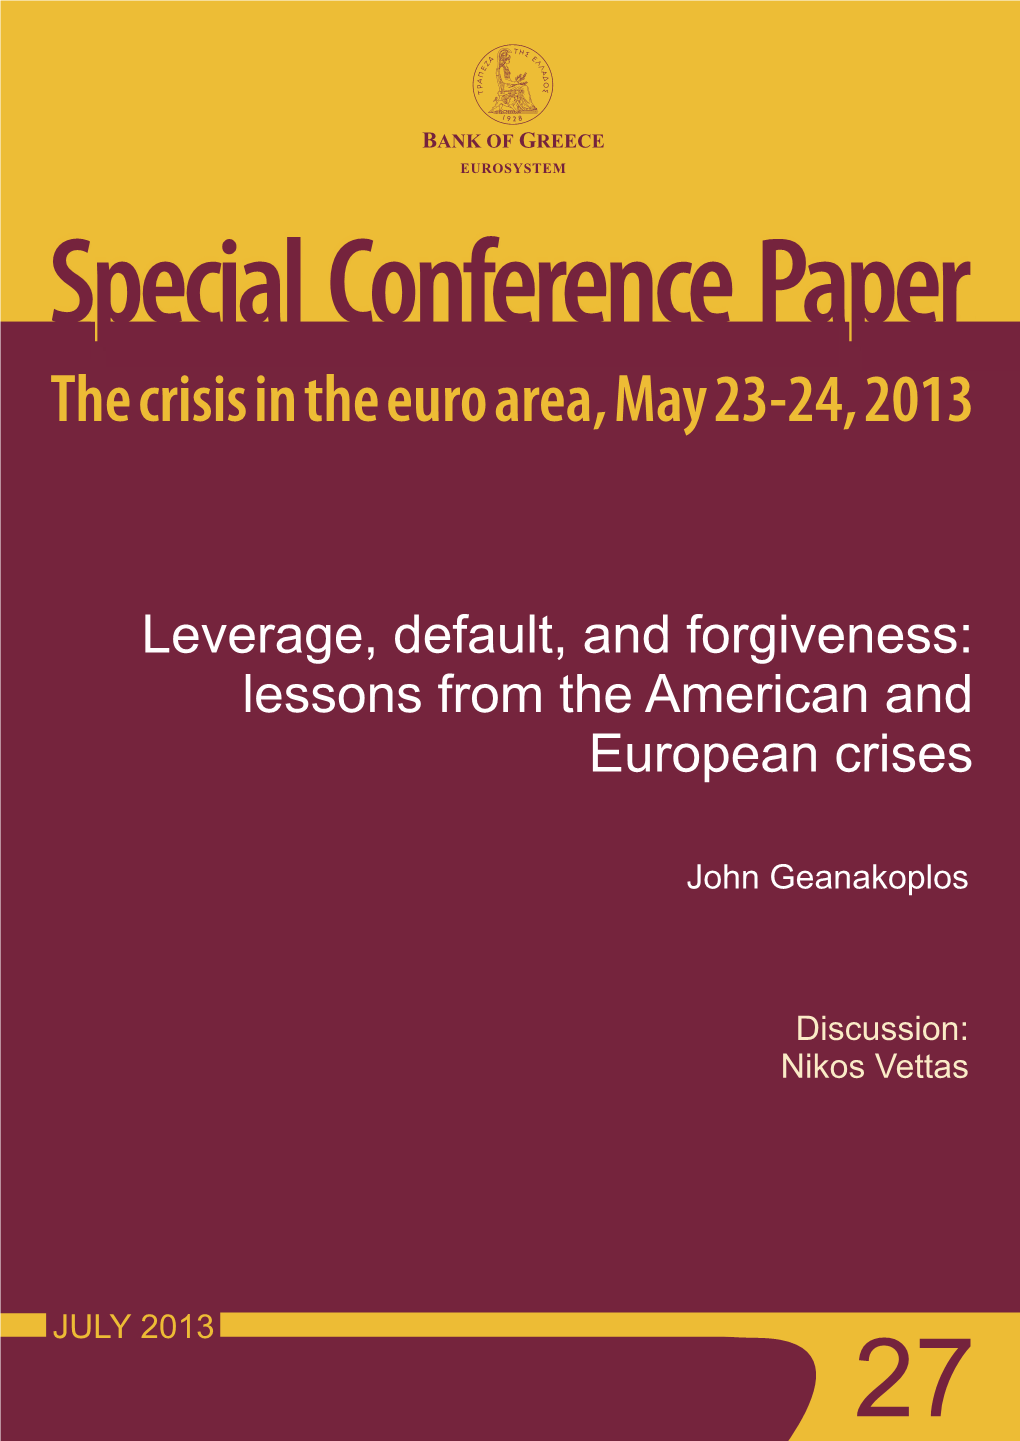 Leverage, Default, and Forgiveness: Lessons from the American and European Crises